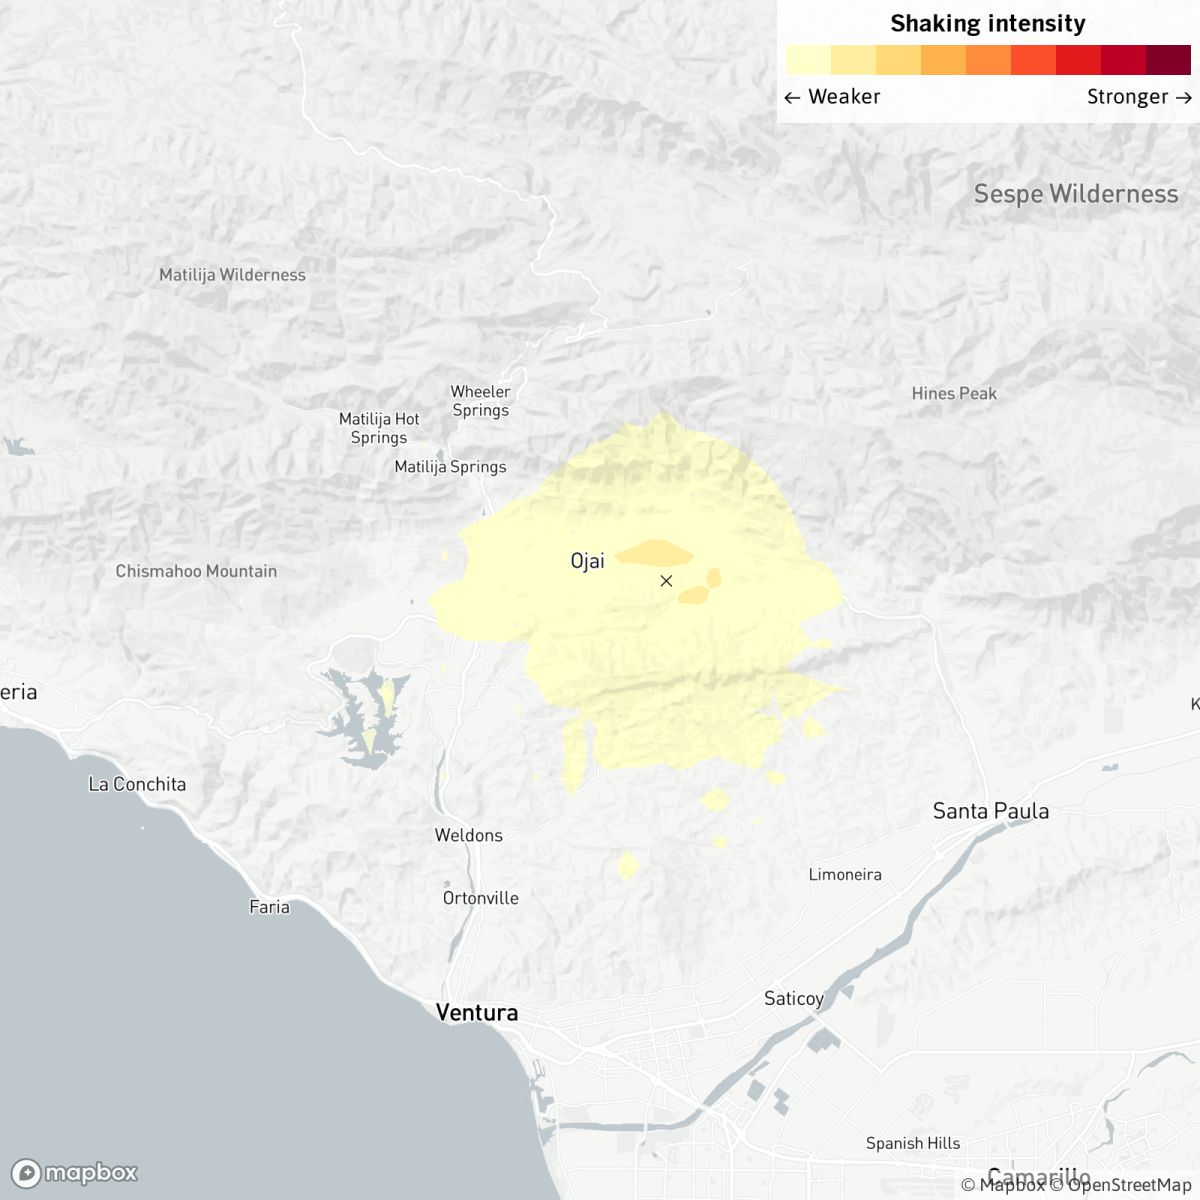 A color-coded map shows the shaking intensity of an earthquake in Southern California.